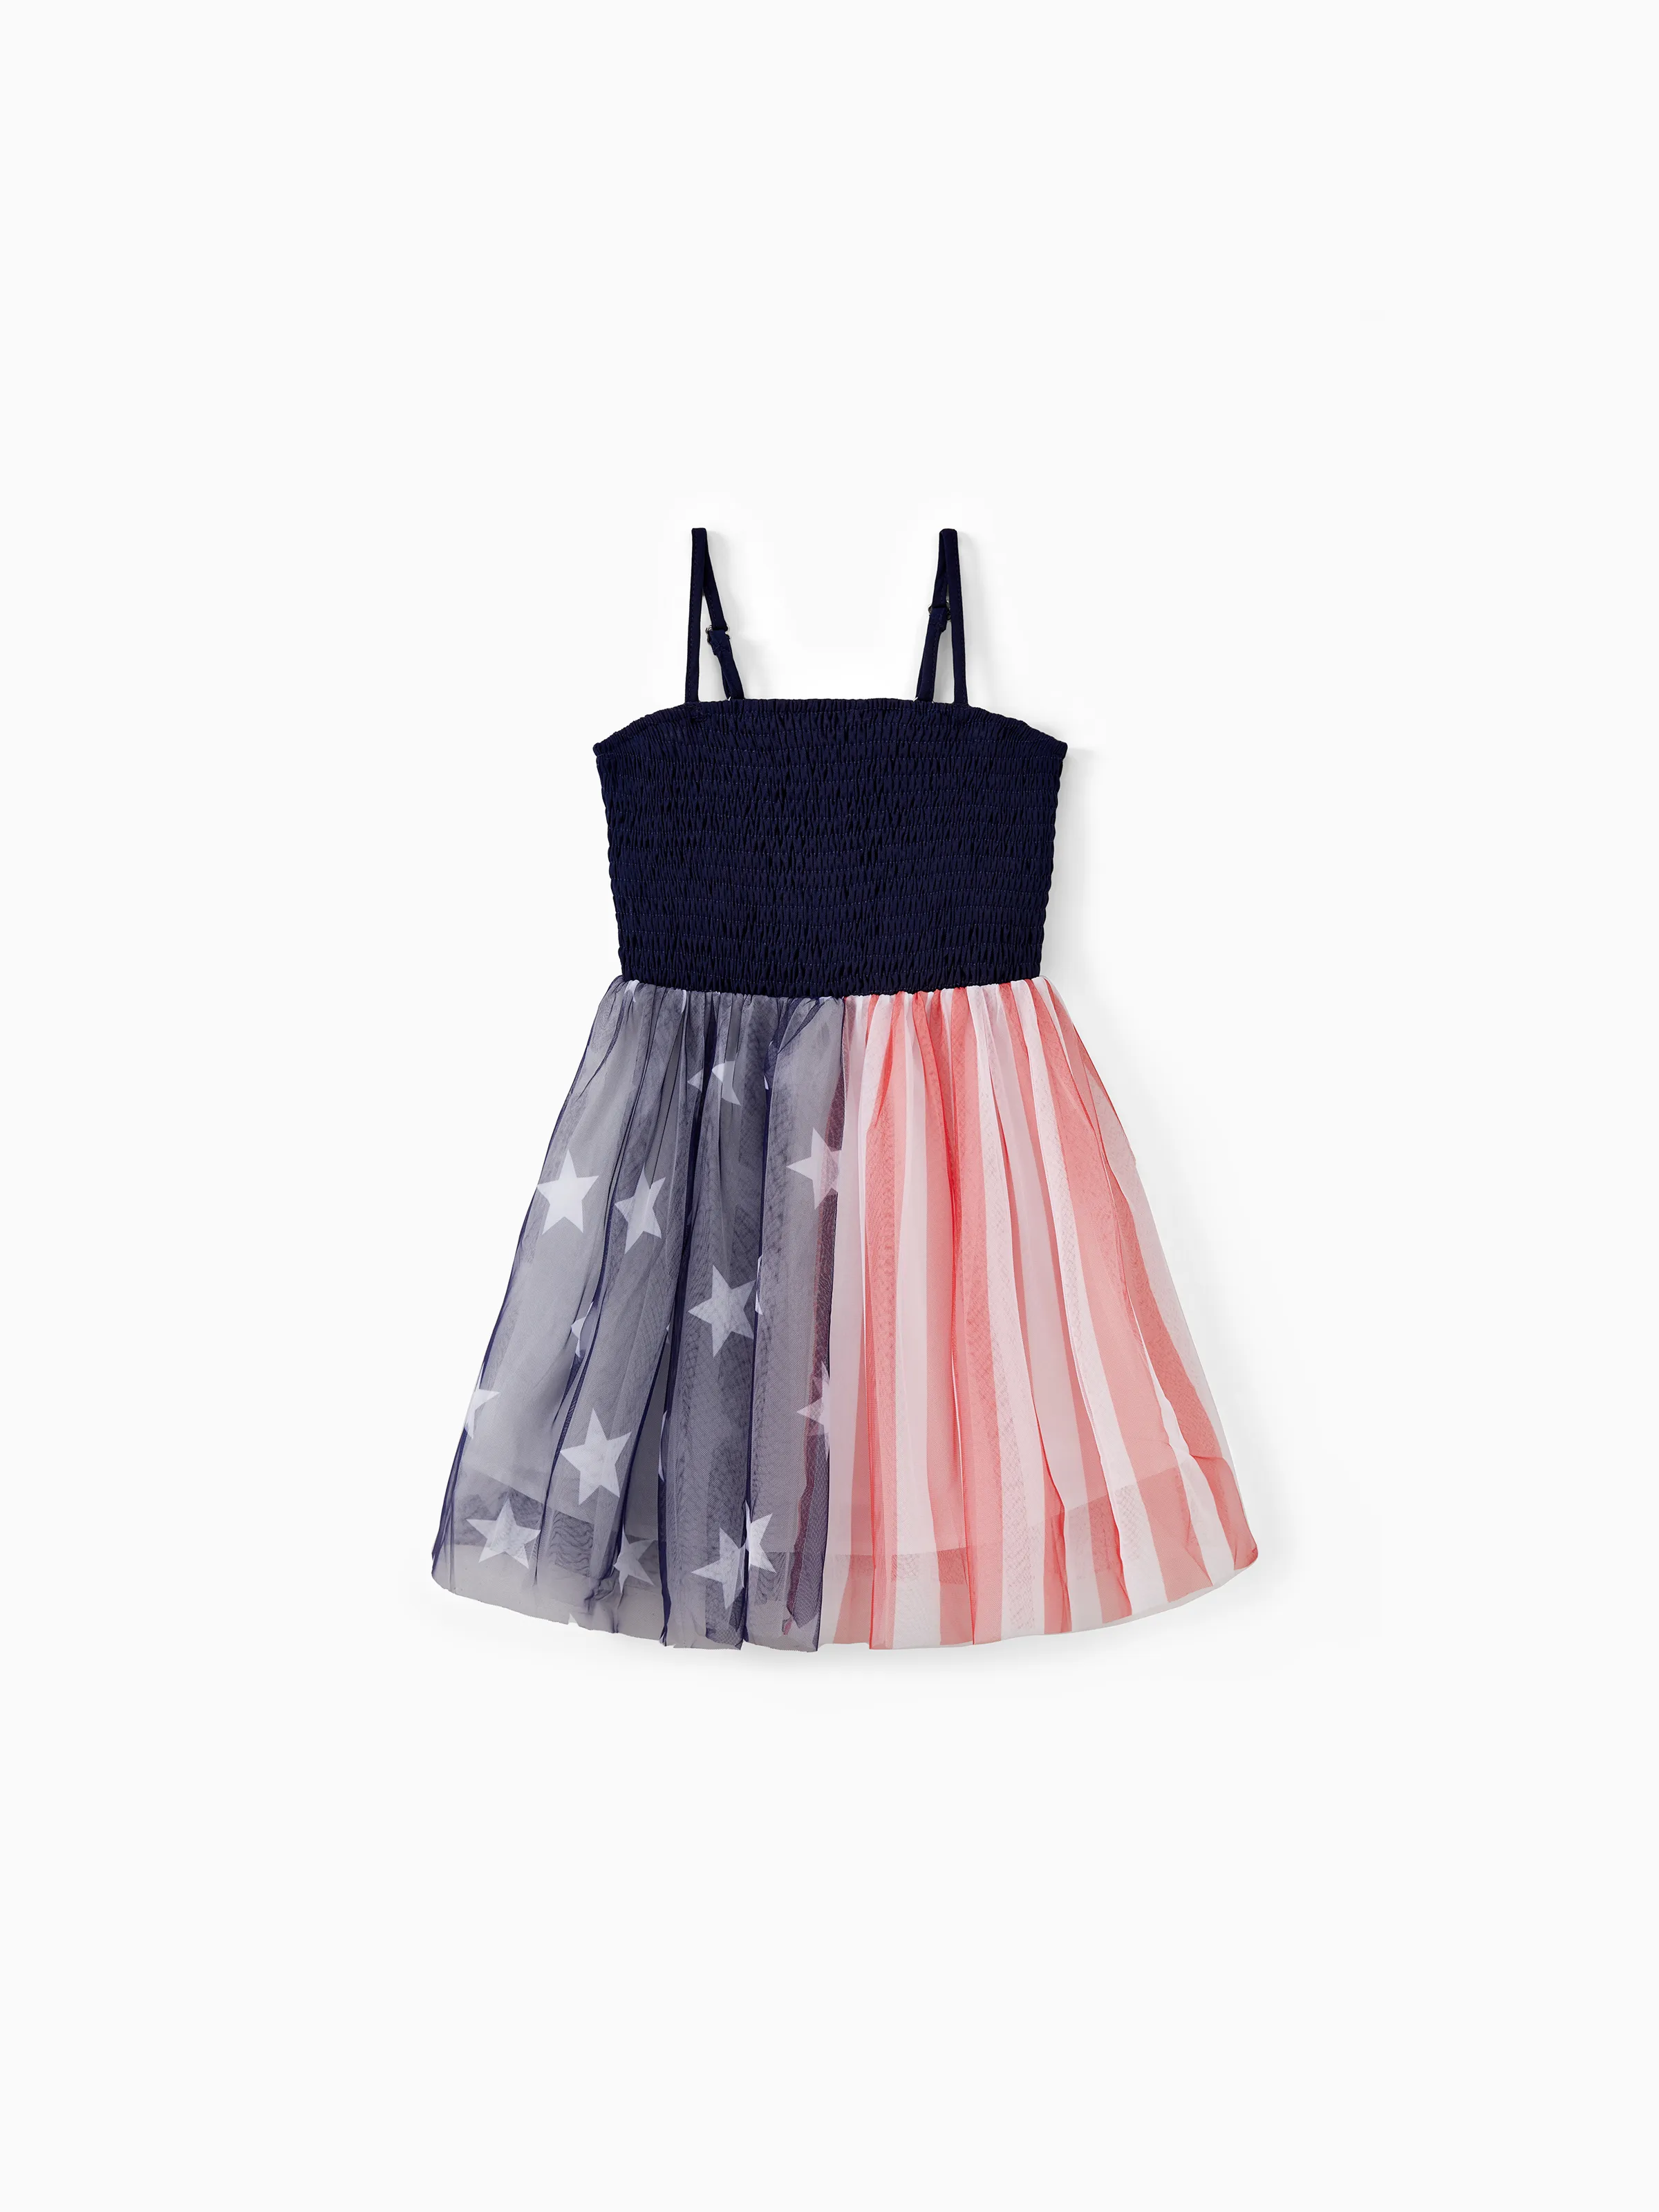 

Independence Day Family Matching American Flag Print Vacation Shirt and Shirred Black Top Spliced Tulle Dress Sets